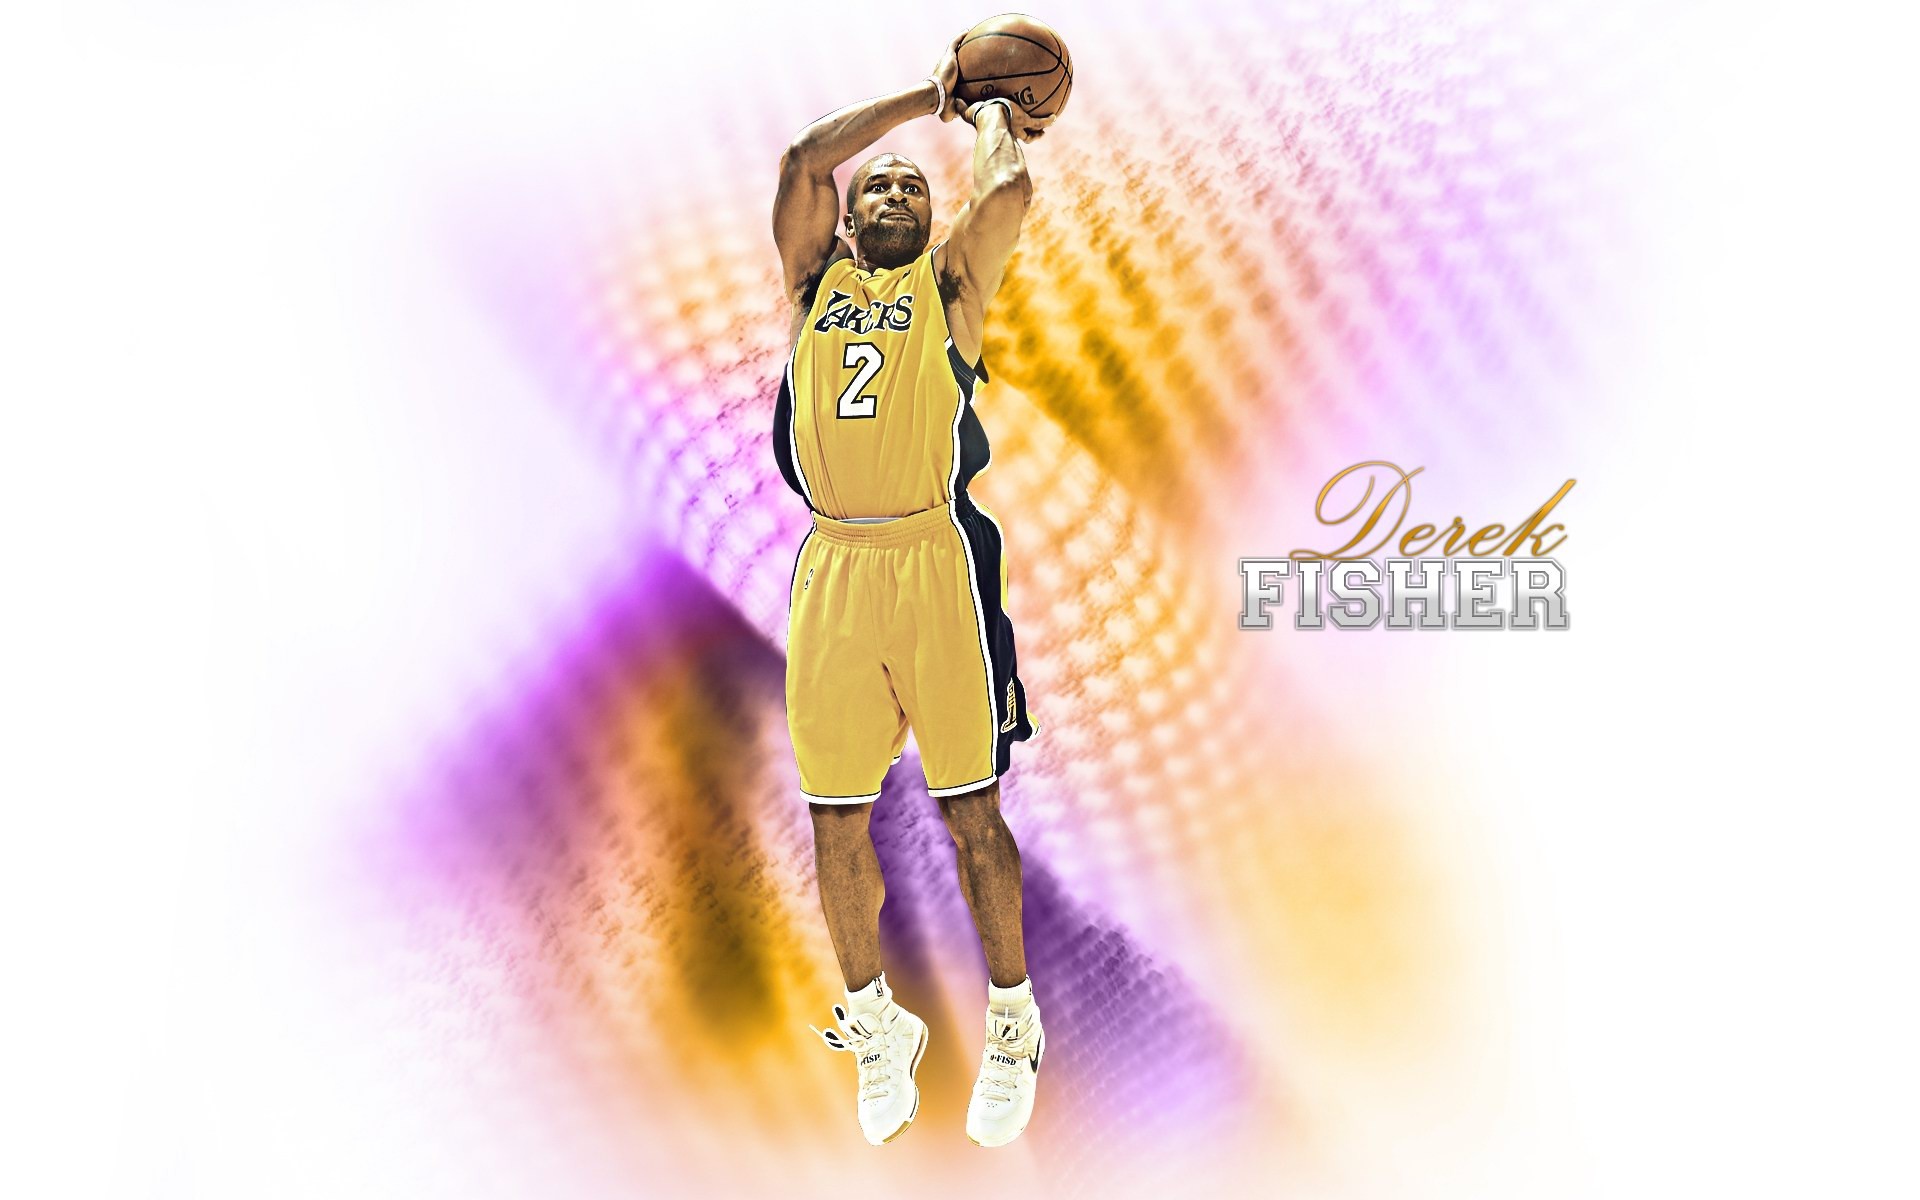 Los Angeles Lakers Official Wallpaper #7 - 1920x1200